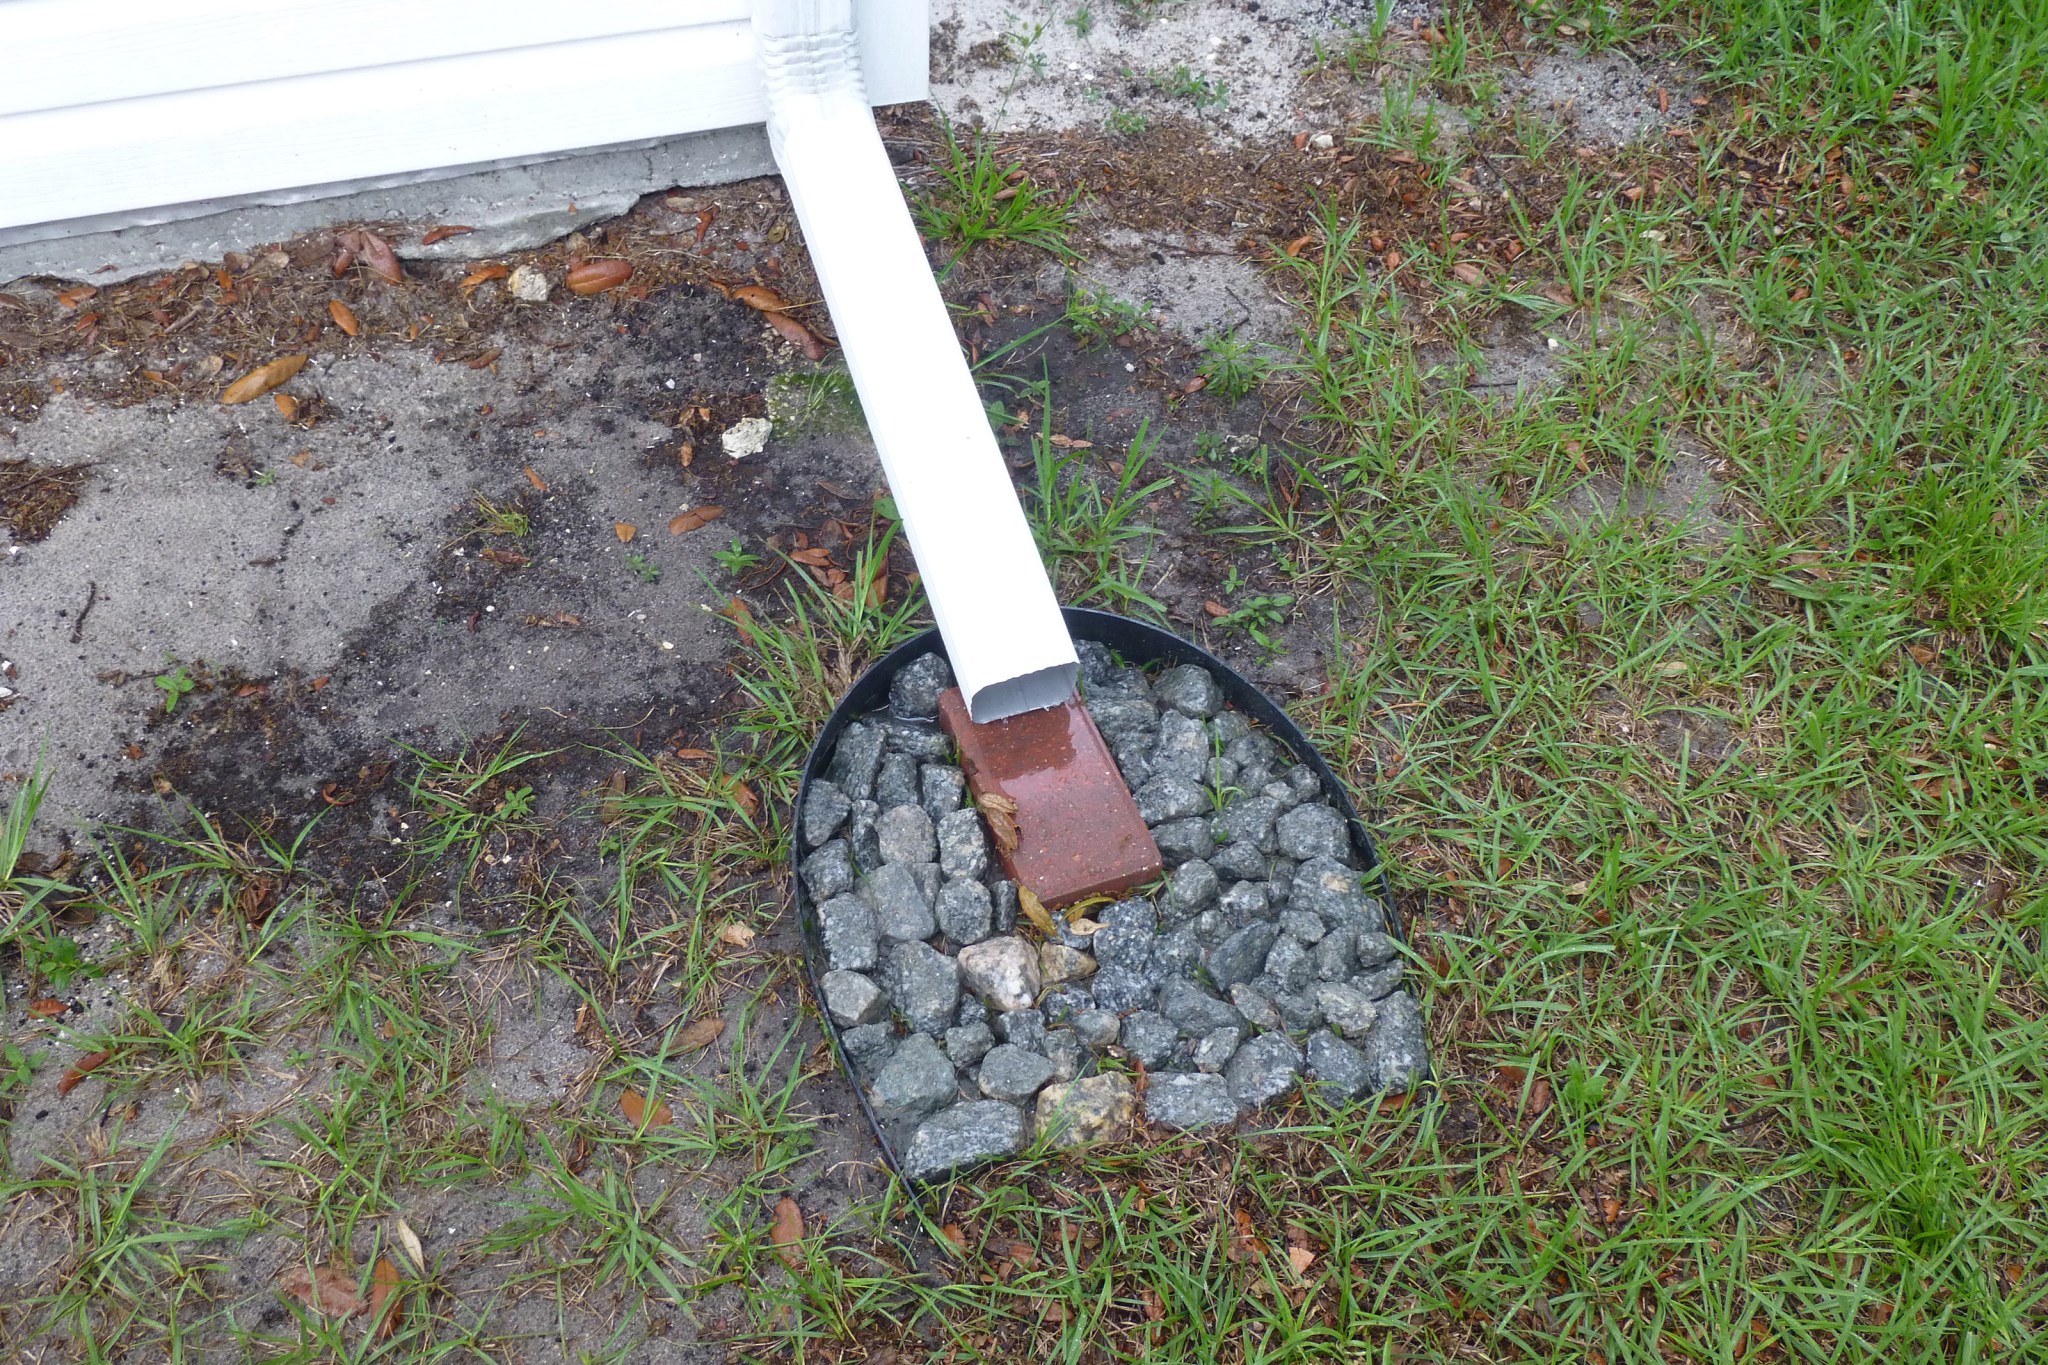 Proper downspout drainage for a house